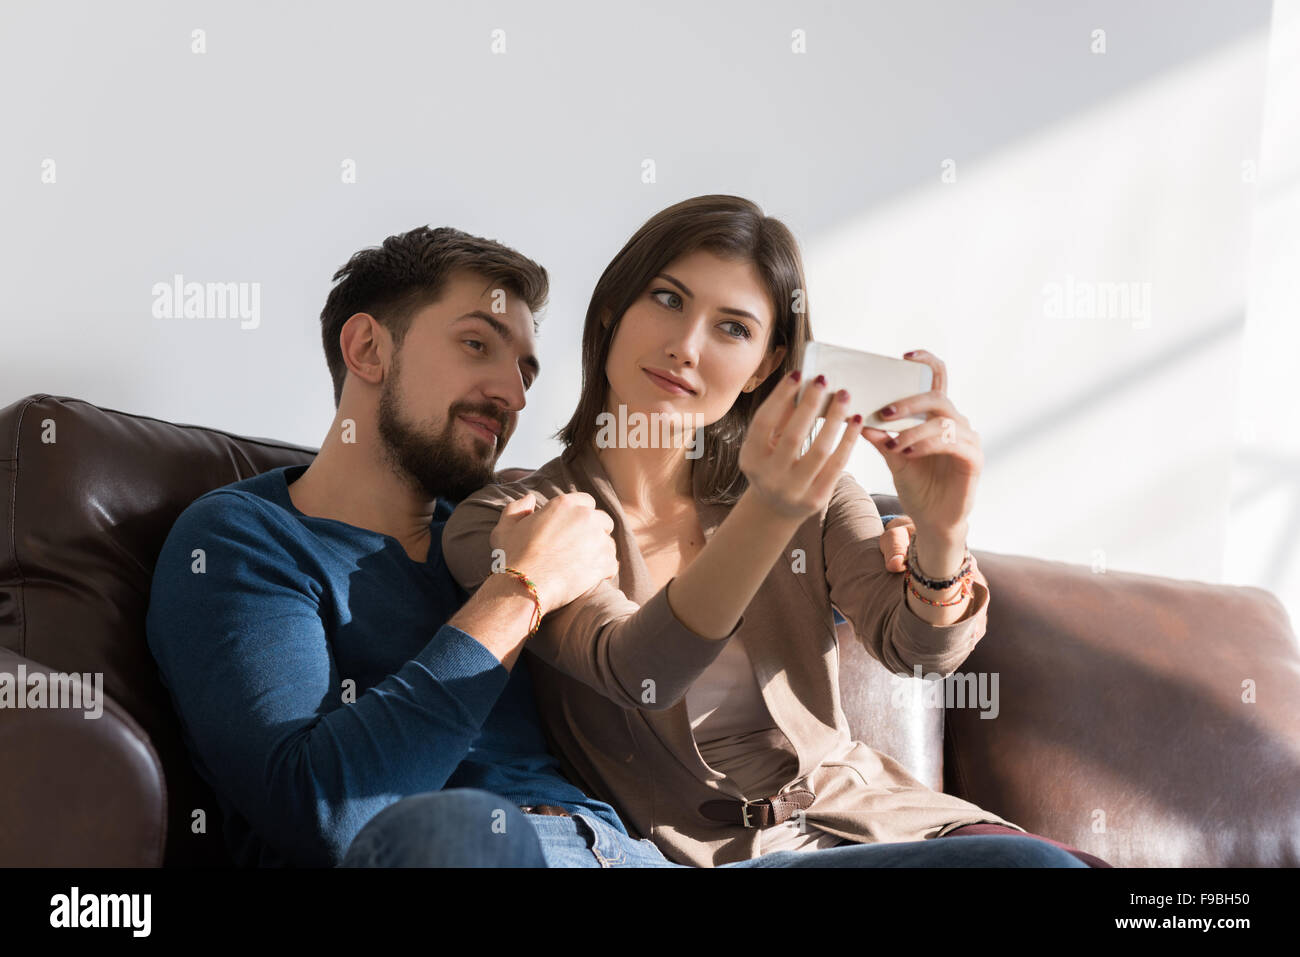 Cheerful couple prendre une avec un smartphone selfies at home sitting on couch Banque D'Images